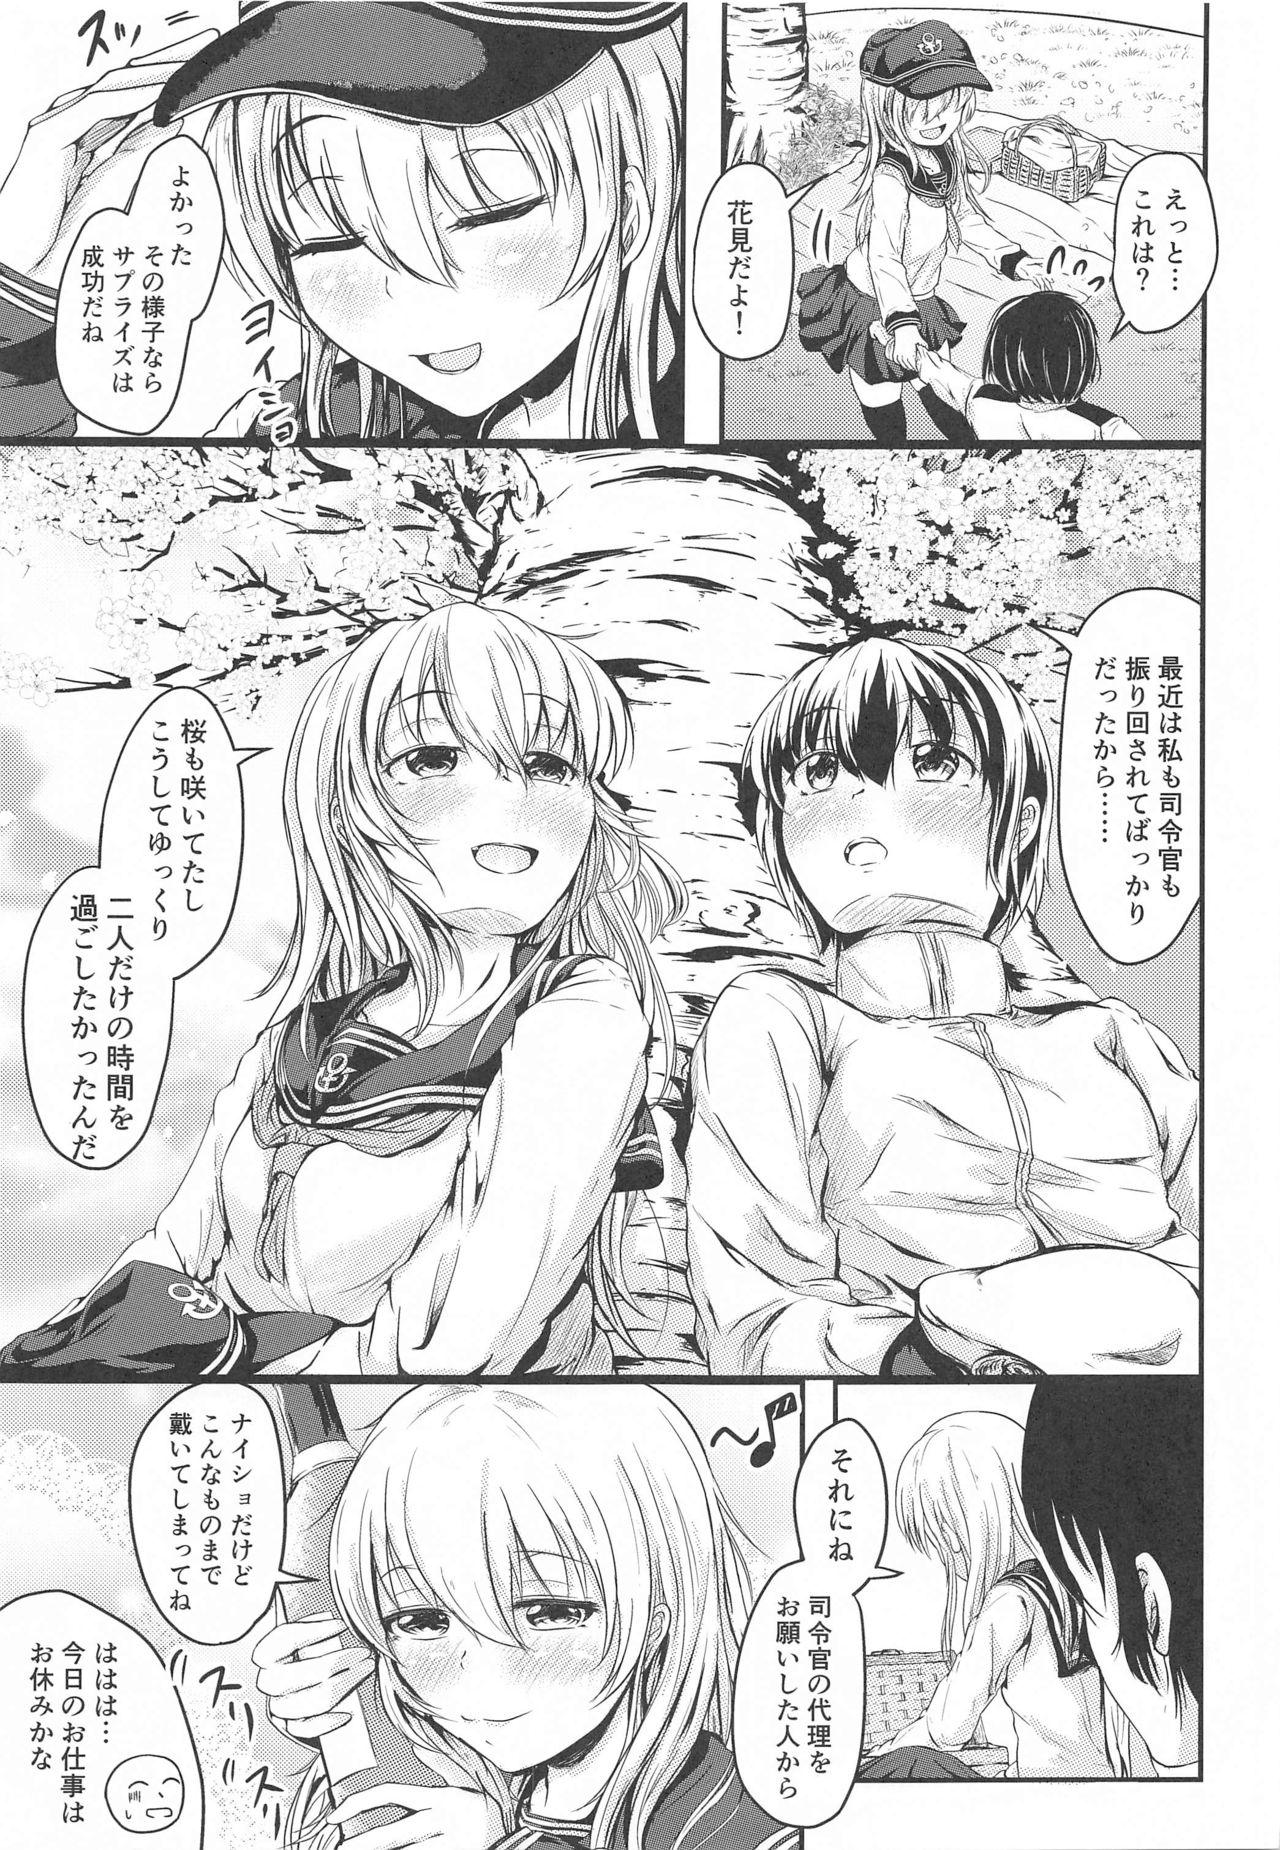 Scissoring Hibiki datte Onee-chan 3 - Kantai collection Fingers - Page 6